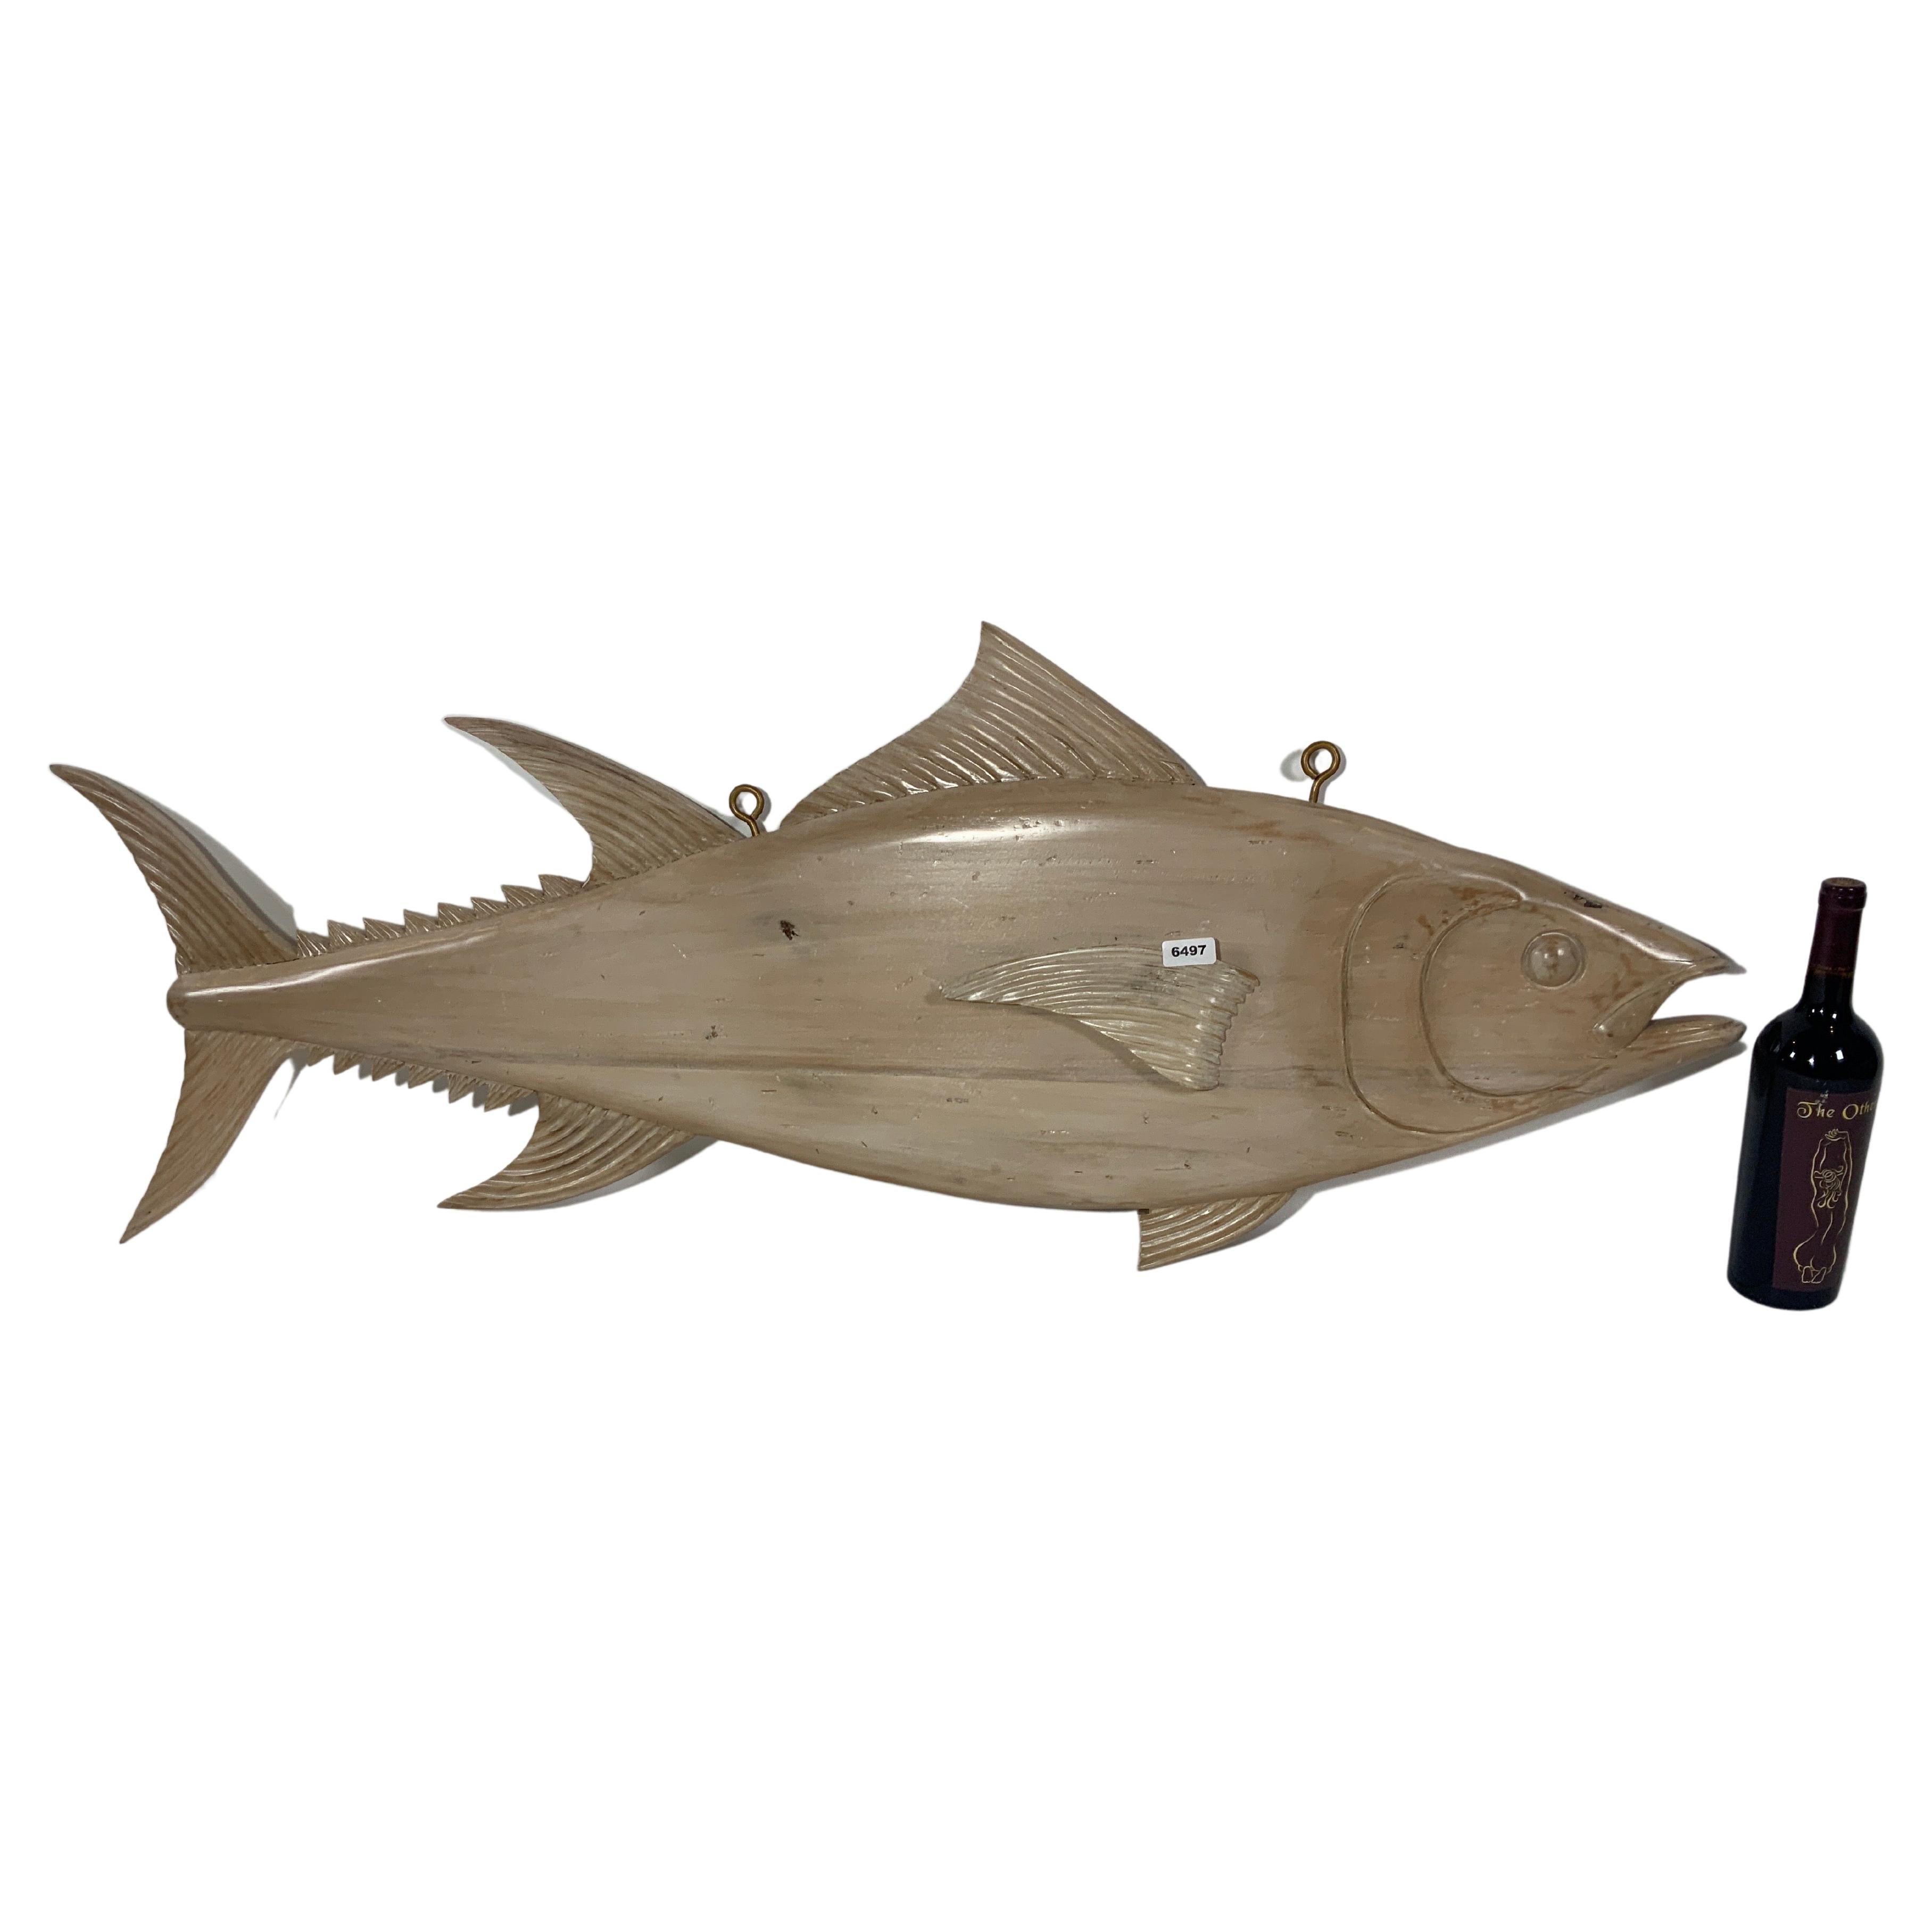 Four foot carved Atlantic bluefin tuna with a light bleached finish, details include fins, gills, eyes, snout, etc. Fitted with iron hanging hooks. This piece is reminiscent of the trade signs that fishmongers would hang above their stalls on the